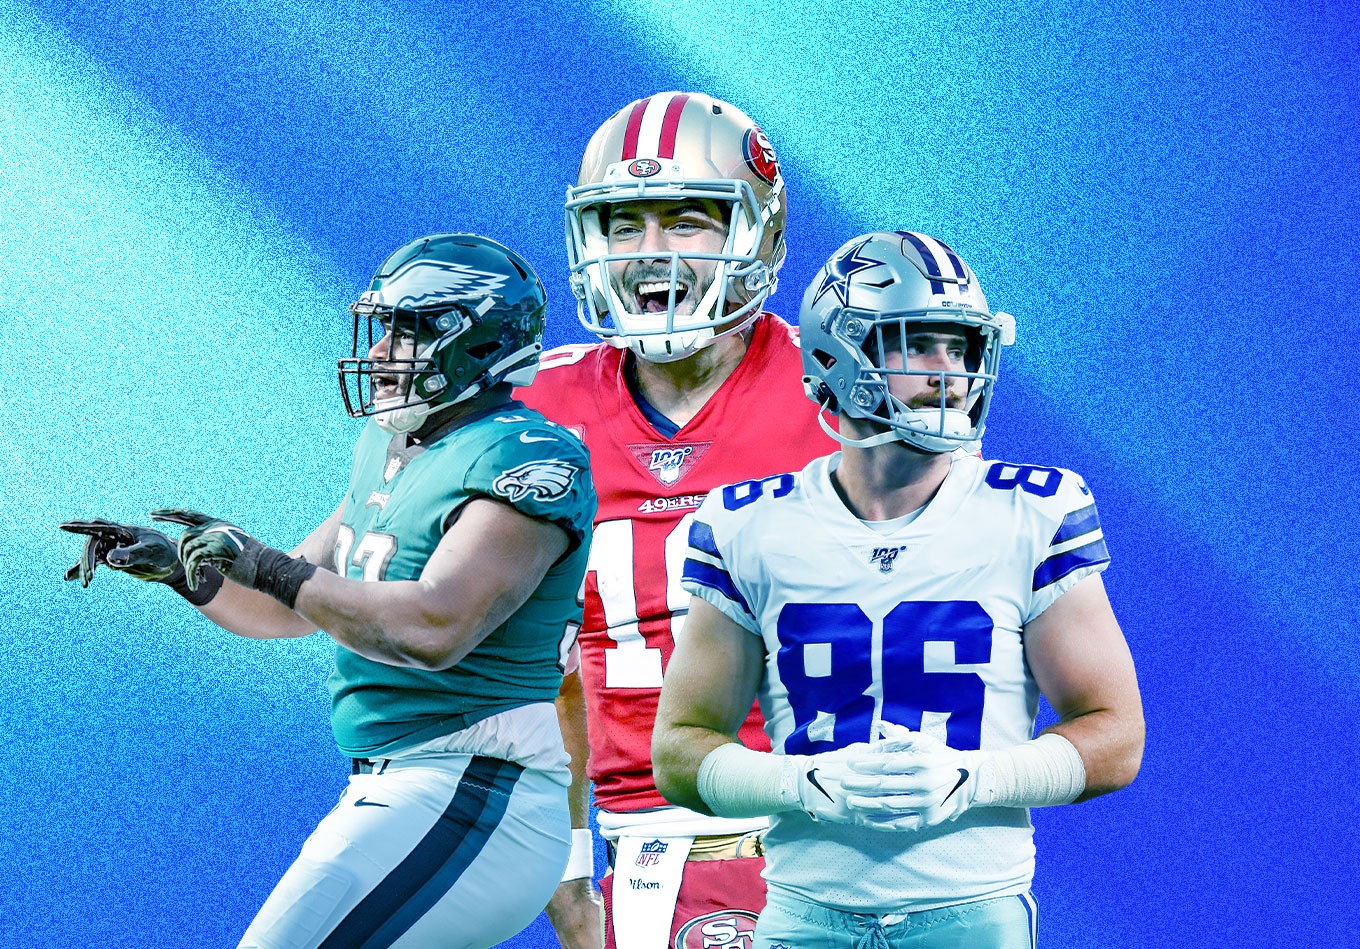 2023 NFL Free Agents: The Best Players Available by the Data